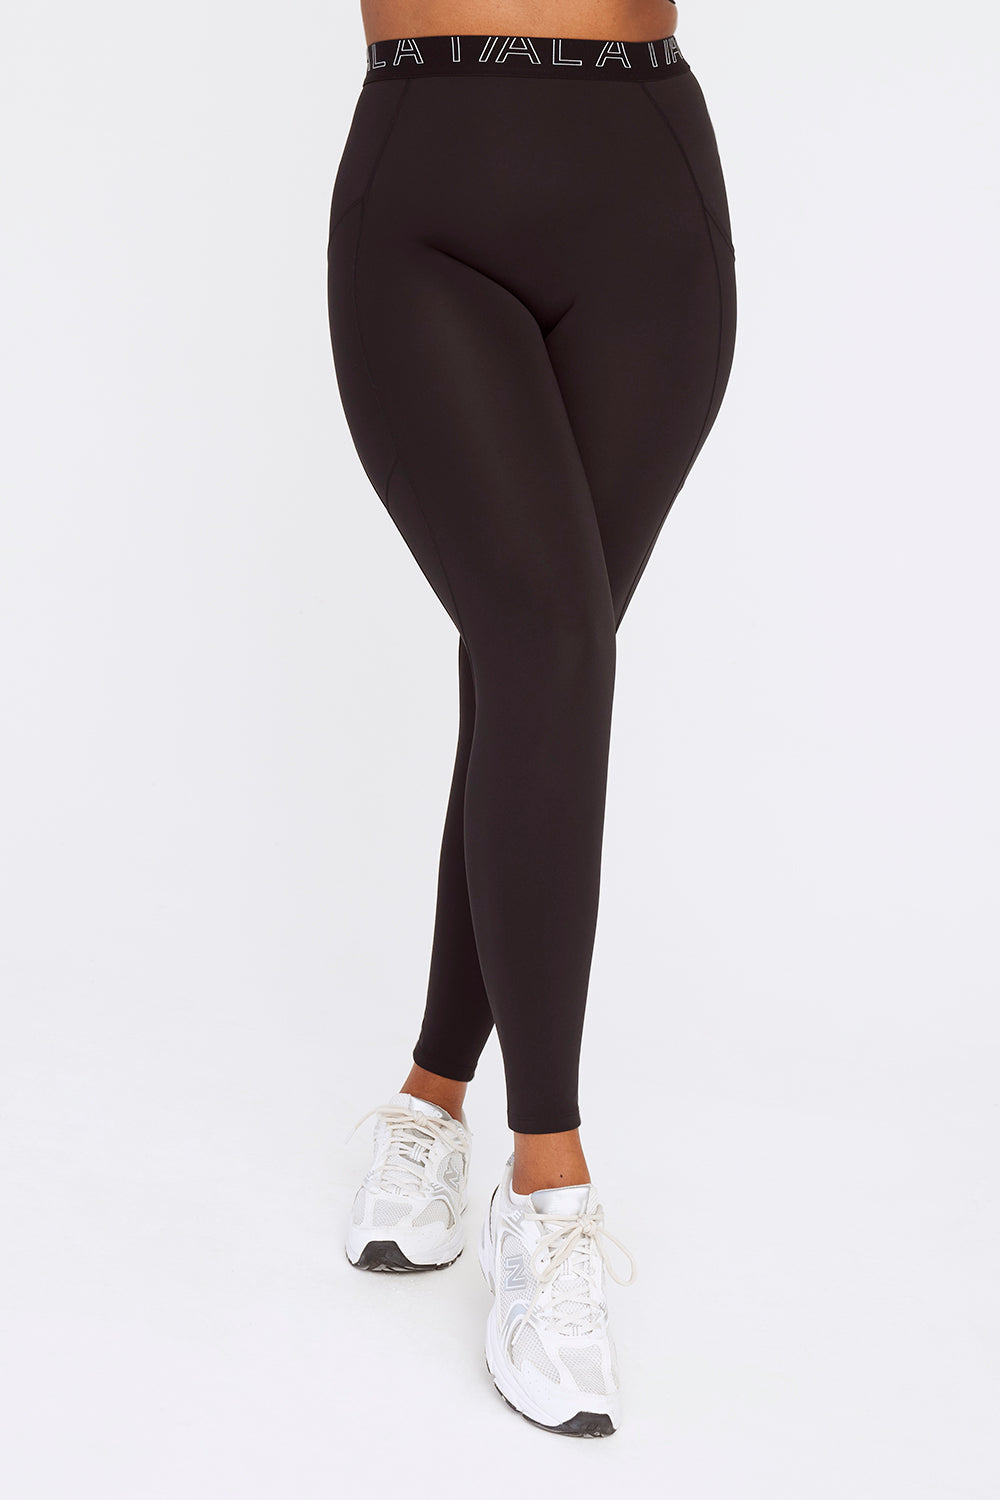 $74 - $150 High-Waisted Trousers & Tights. Nike CA